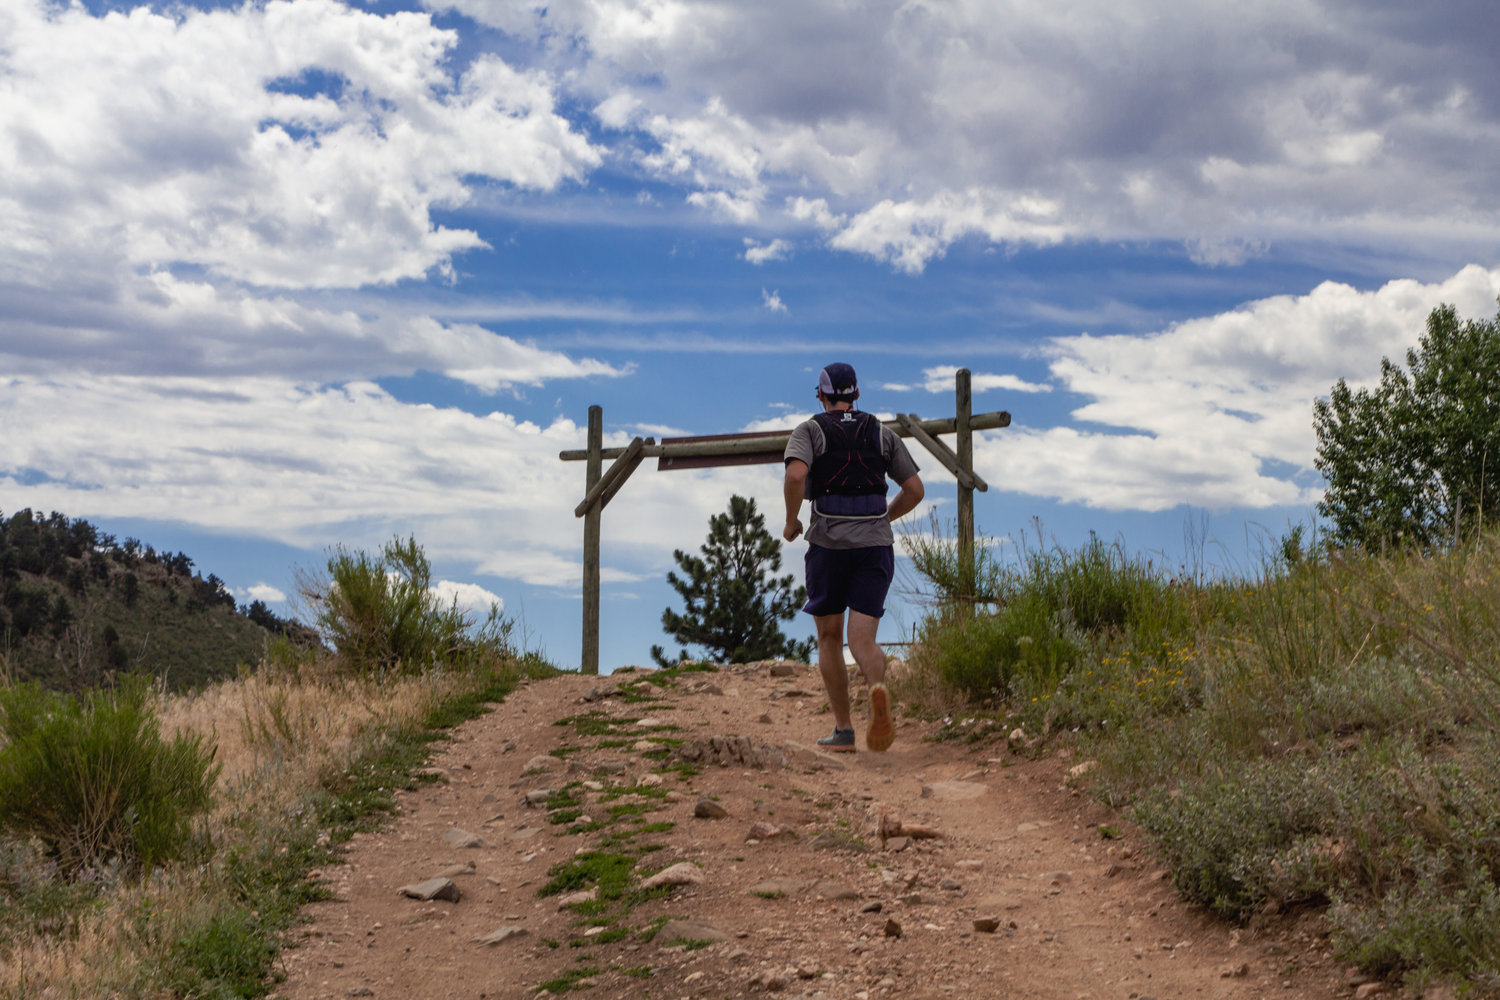 Trail running is a popular activity in Golden's White Ranch Park.